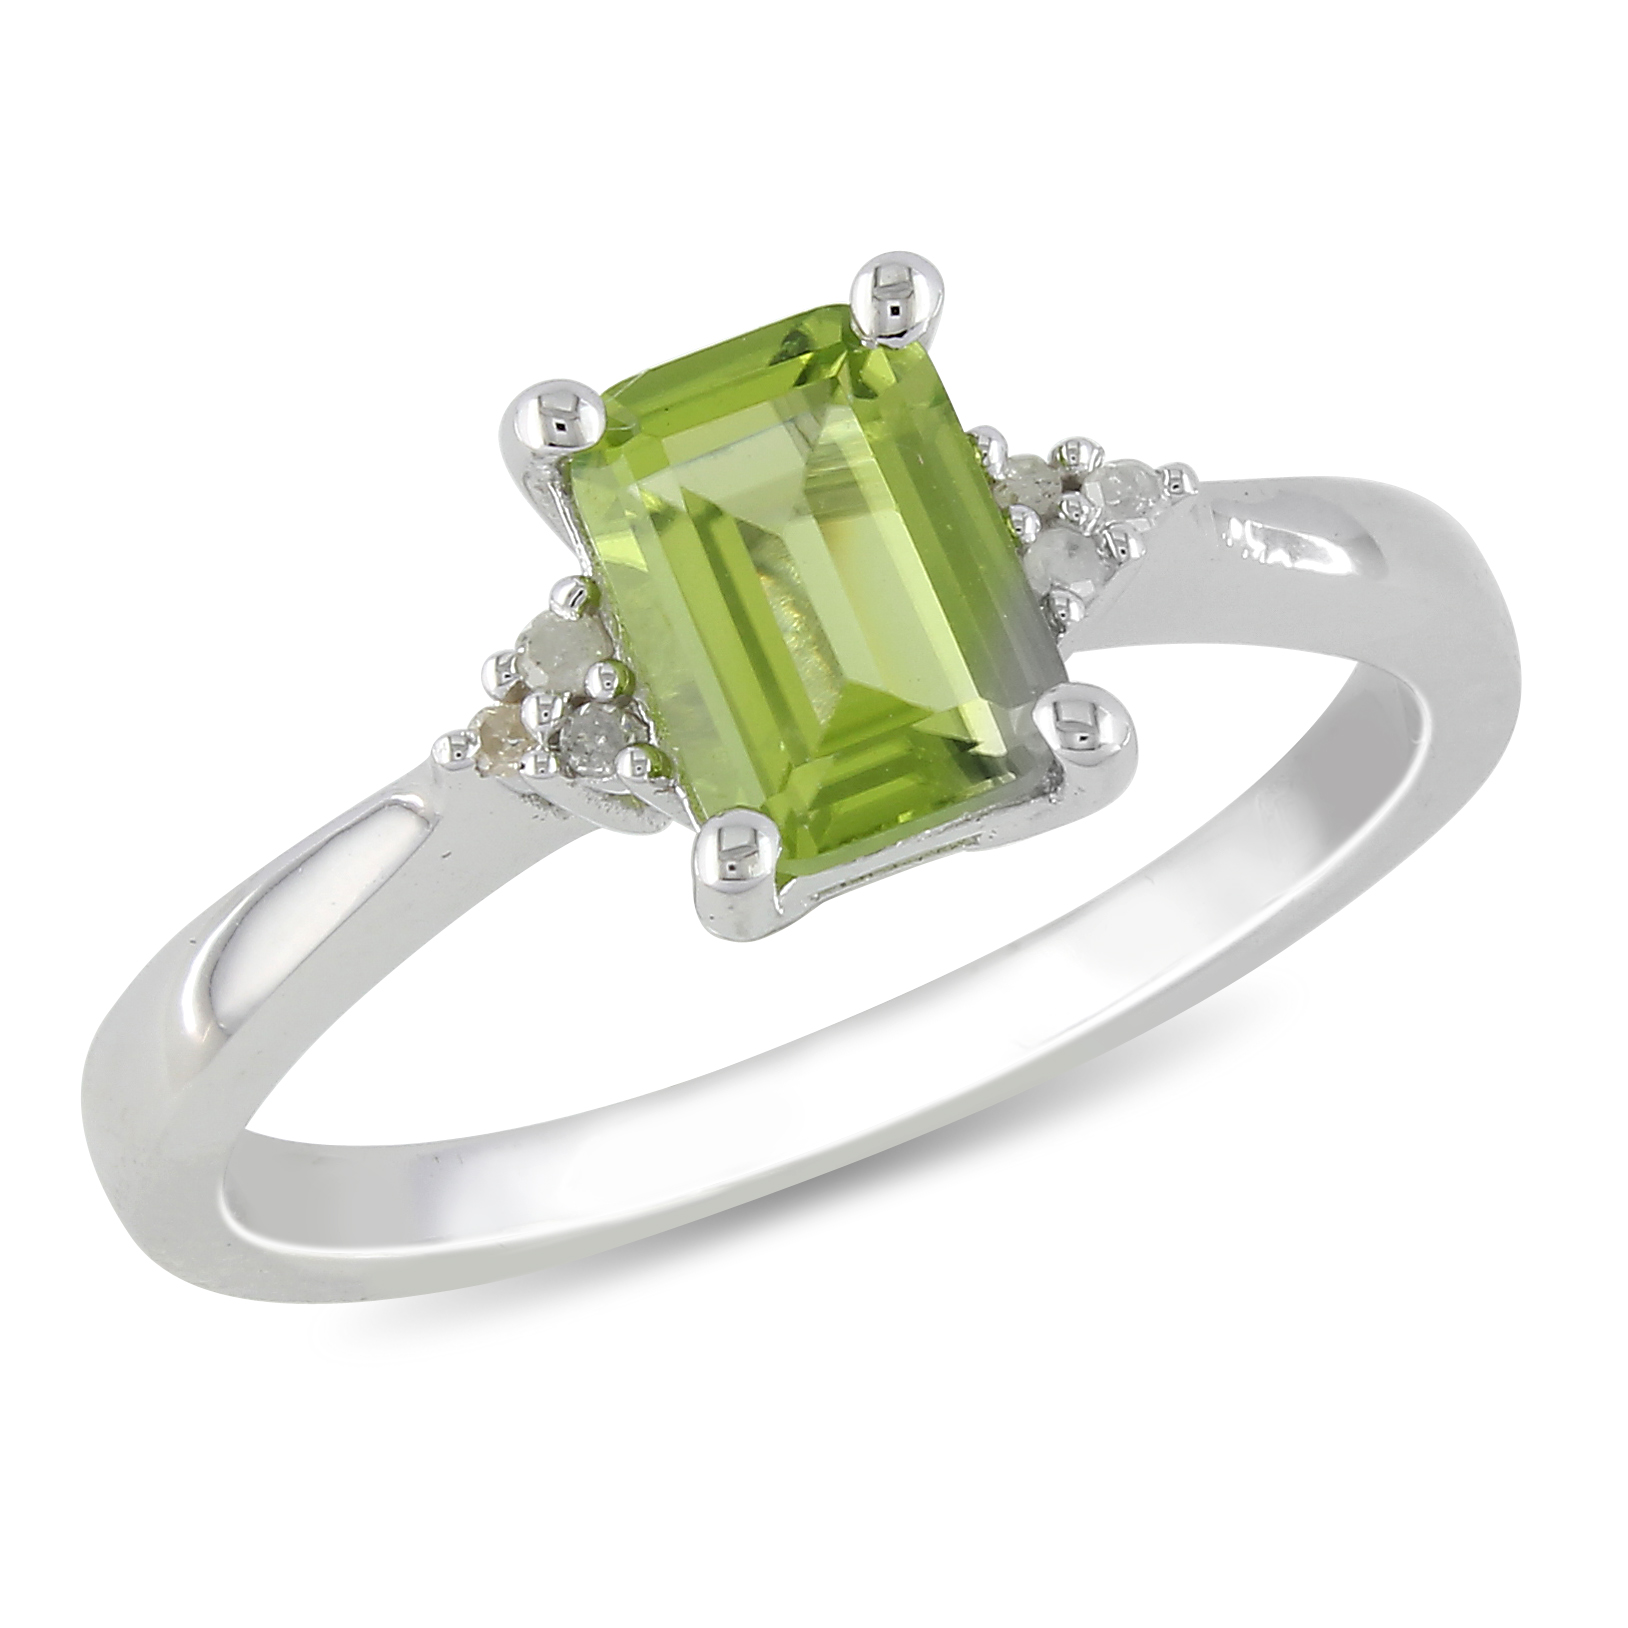 Amour 0.03 Carat T.W. Diamond and 1 Carat T.G.W. Peridot Fashion Ring in Sterling Silver I3